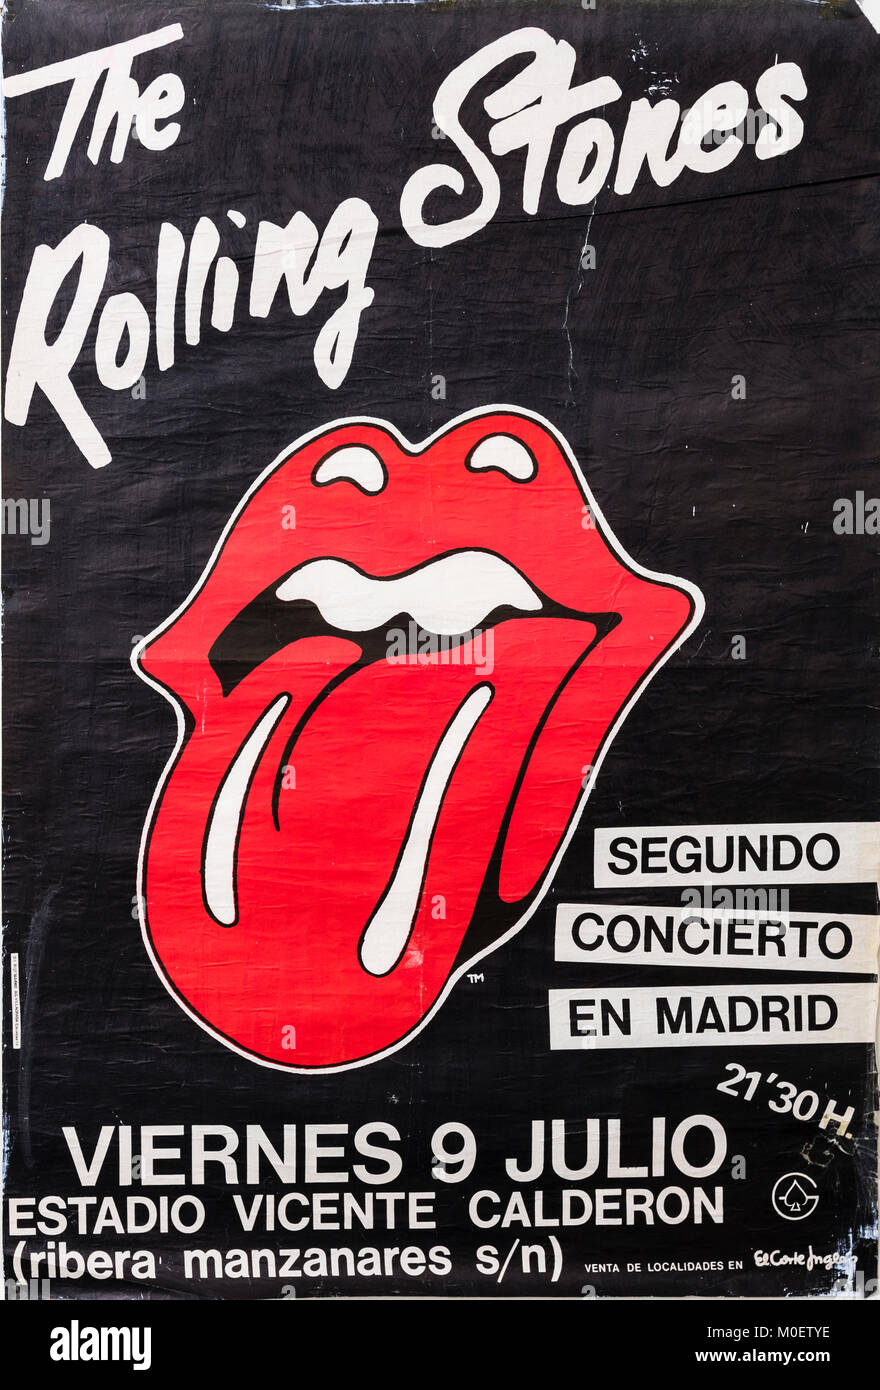 The Rolling Stones in concert, July 1982 Madrid. Musical concert poster Stock Photo